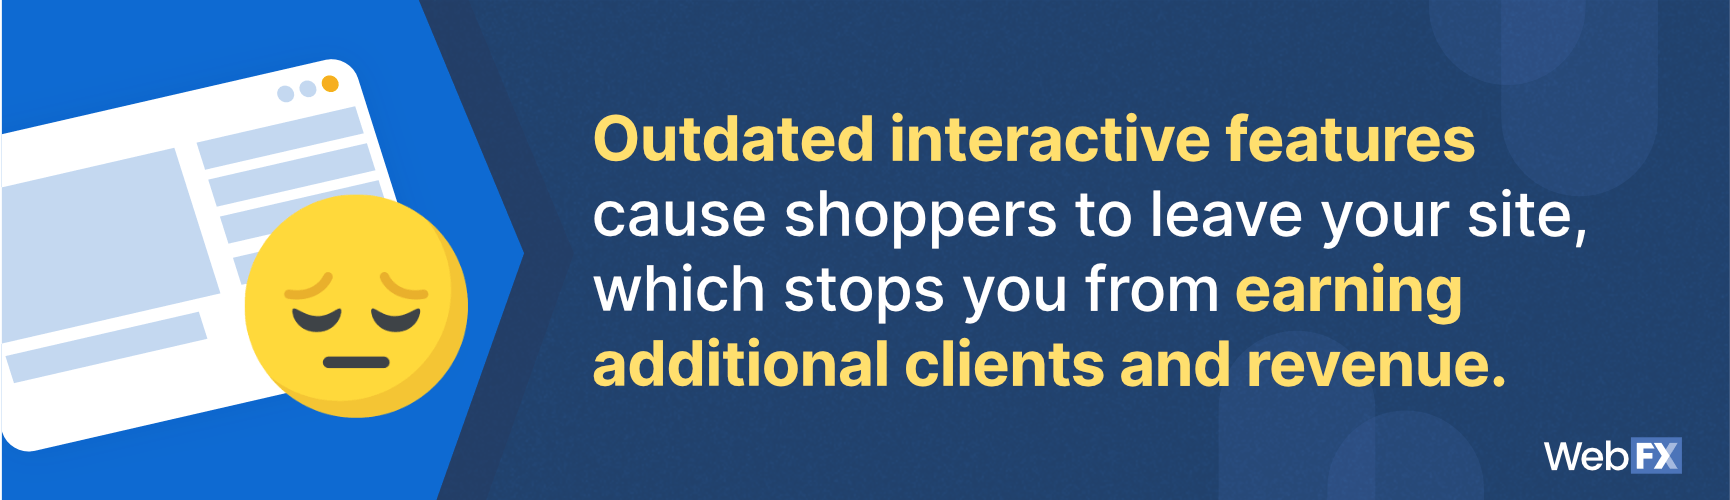 Outdated interactive features cause shoppers to leave your site, which stops you from earning additional clients and revenue